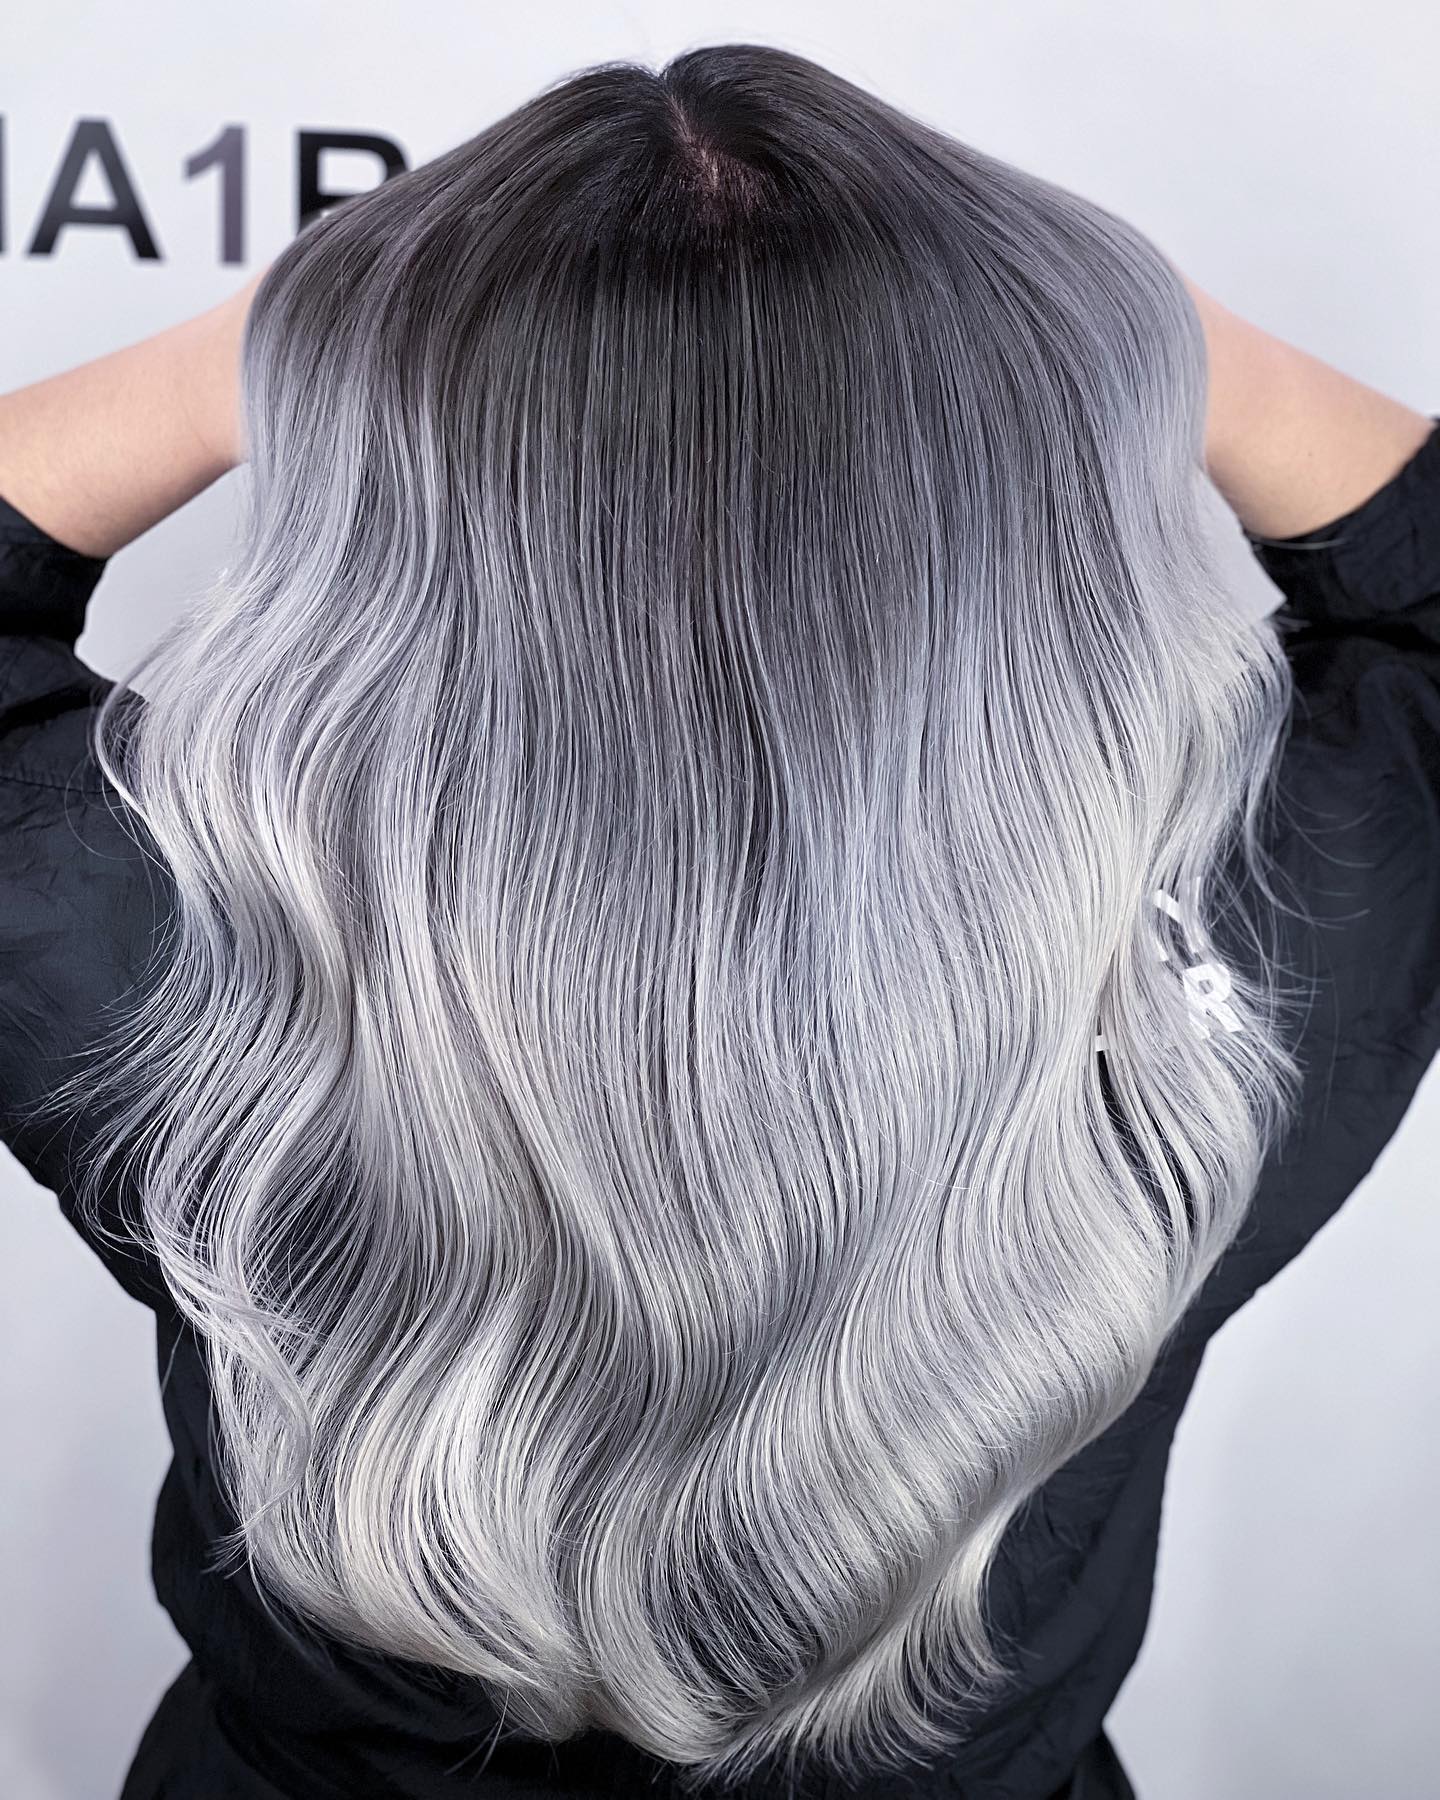 Long Hair with Dark Roots and Blue Hues